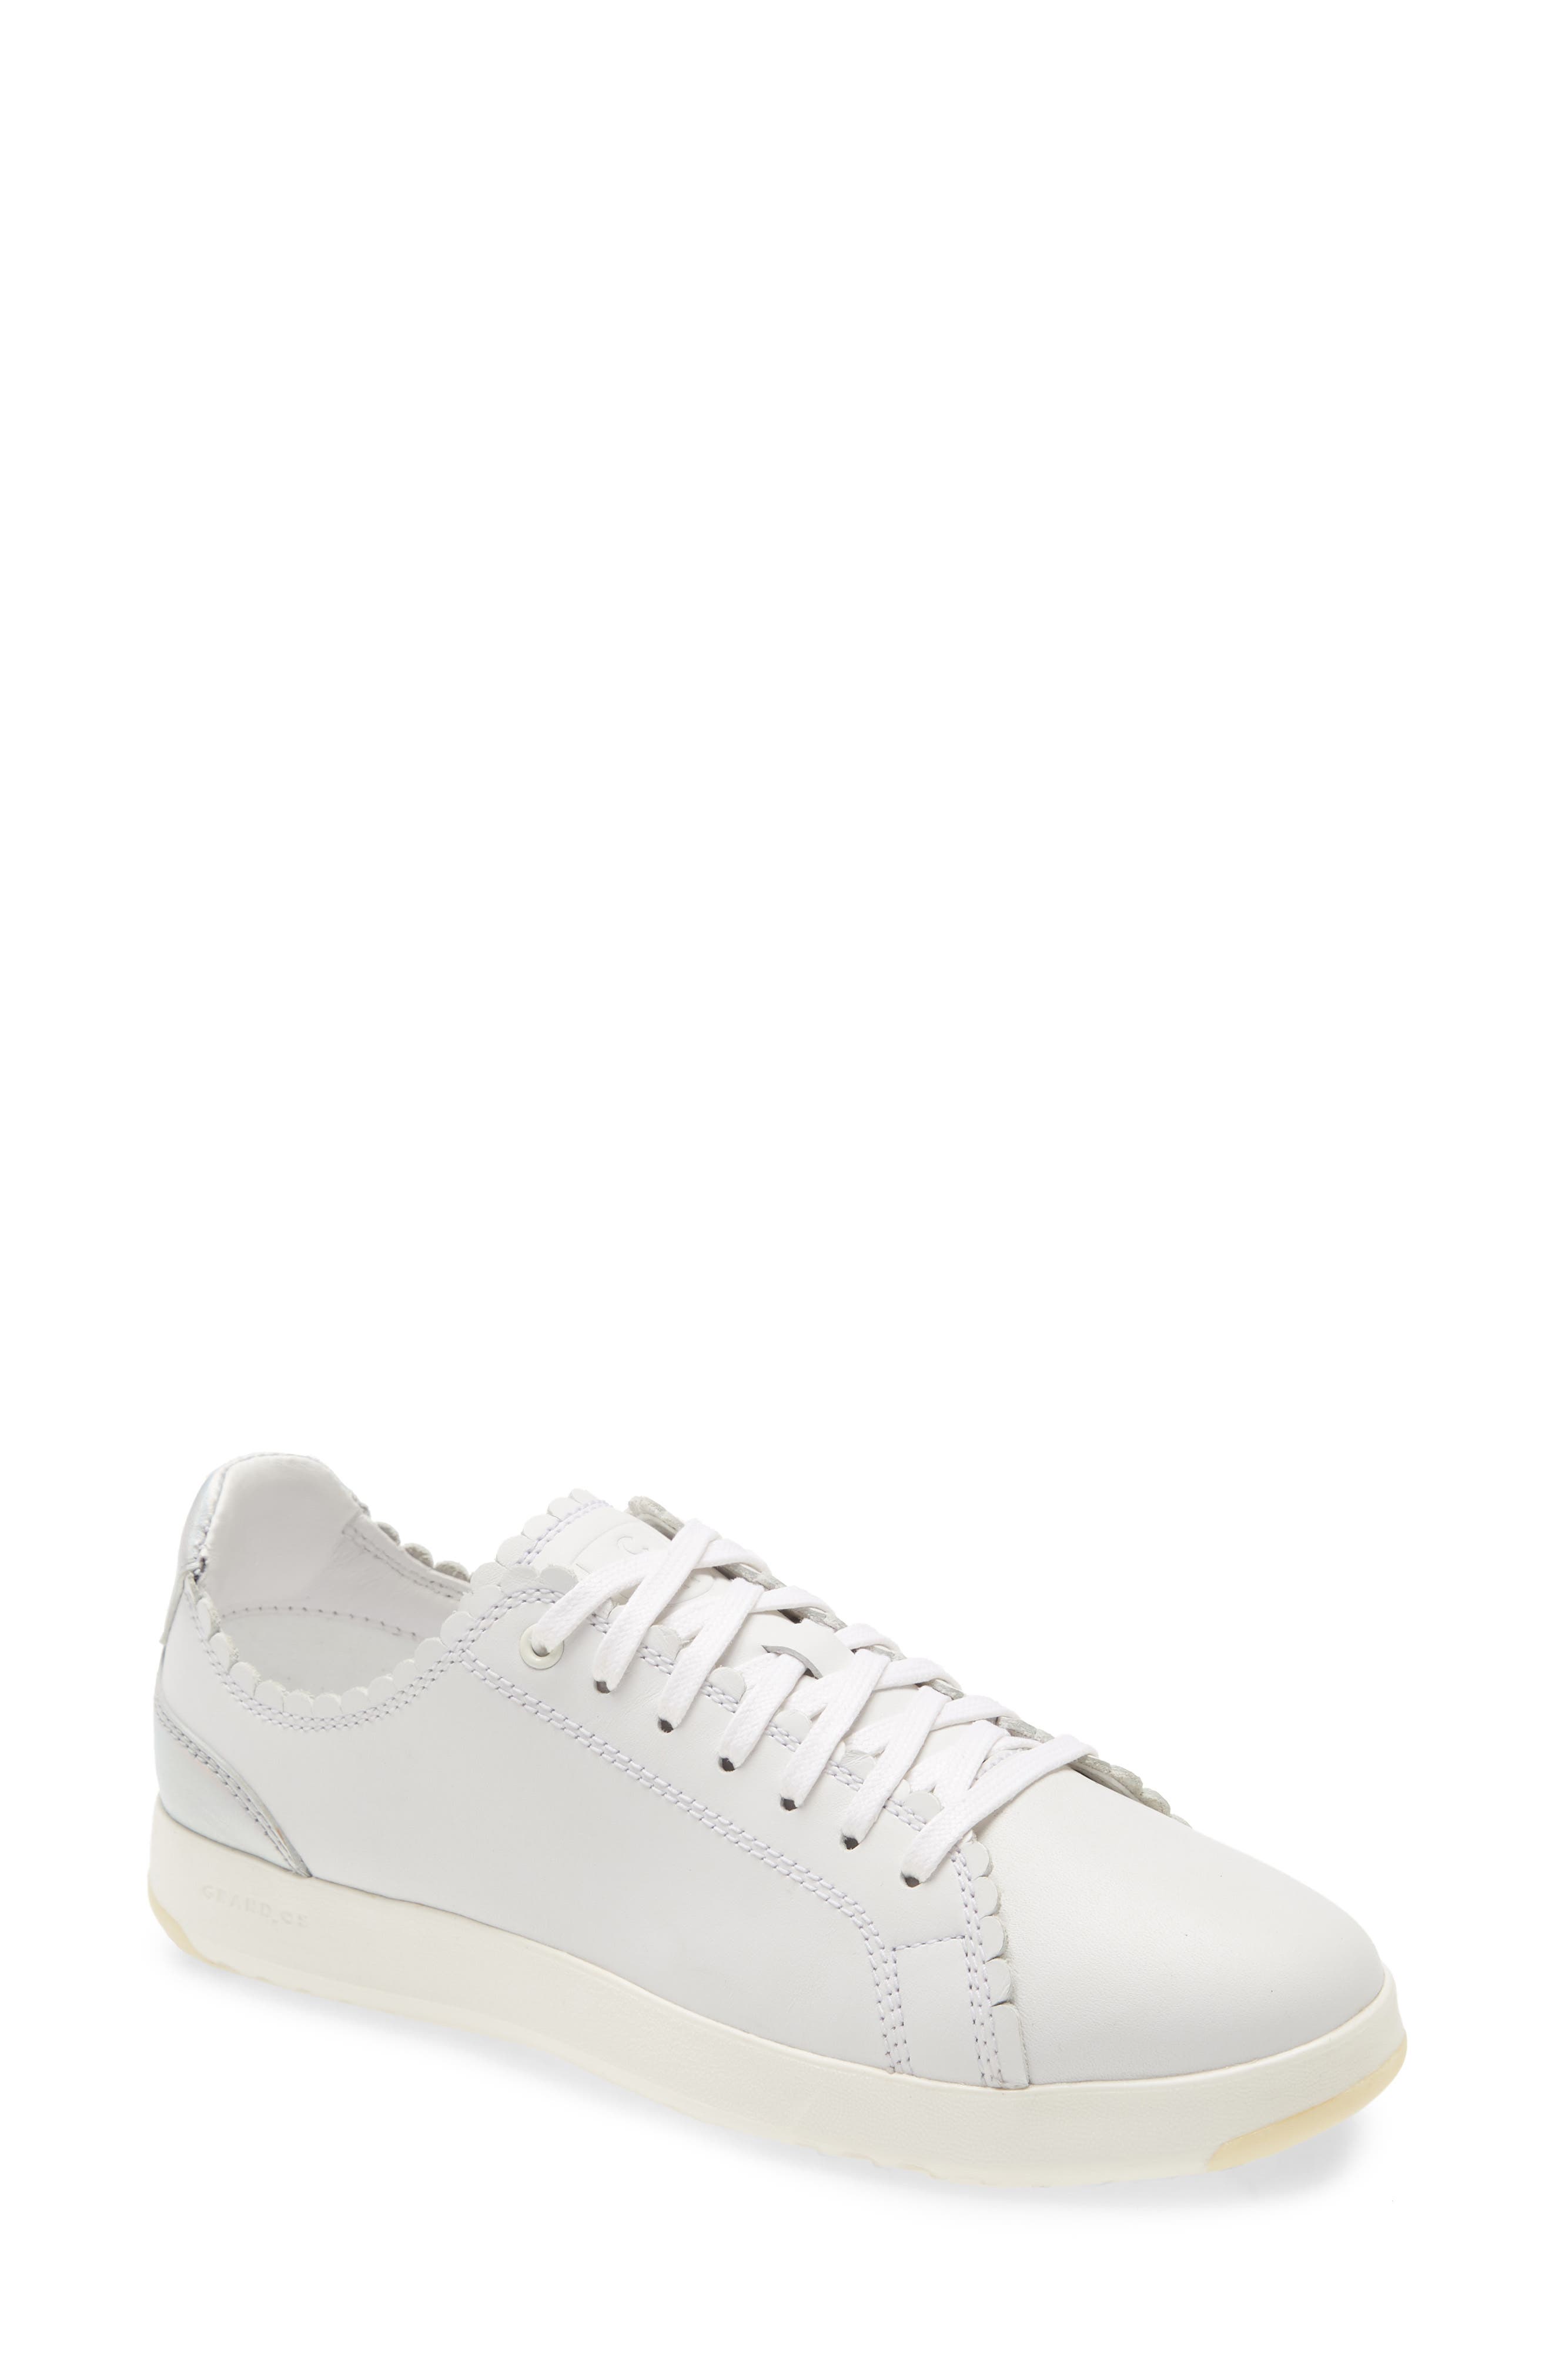 Cole Haan GRANDPRO TENNIS SCALLOPED LACE-UP SHOE